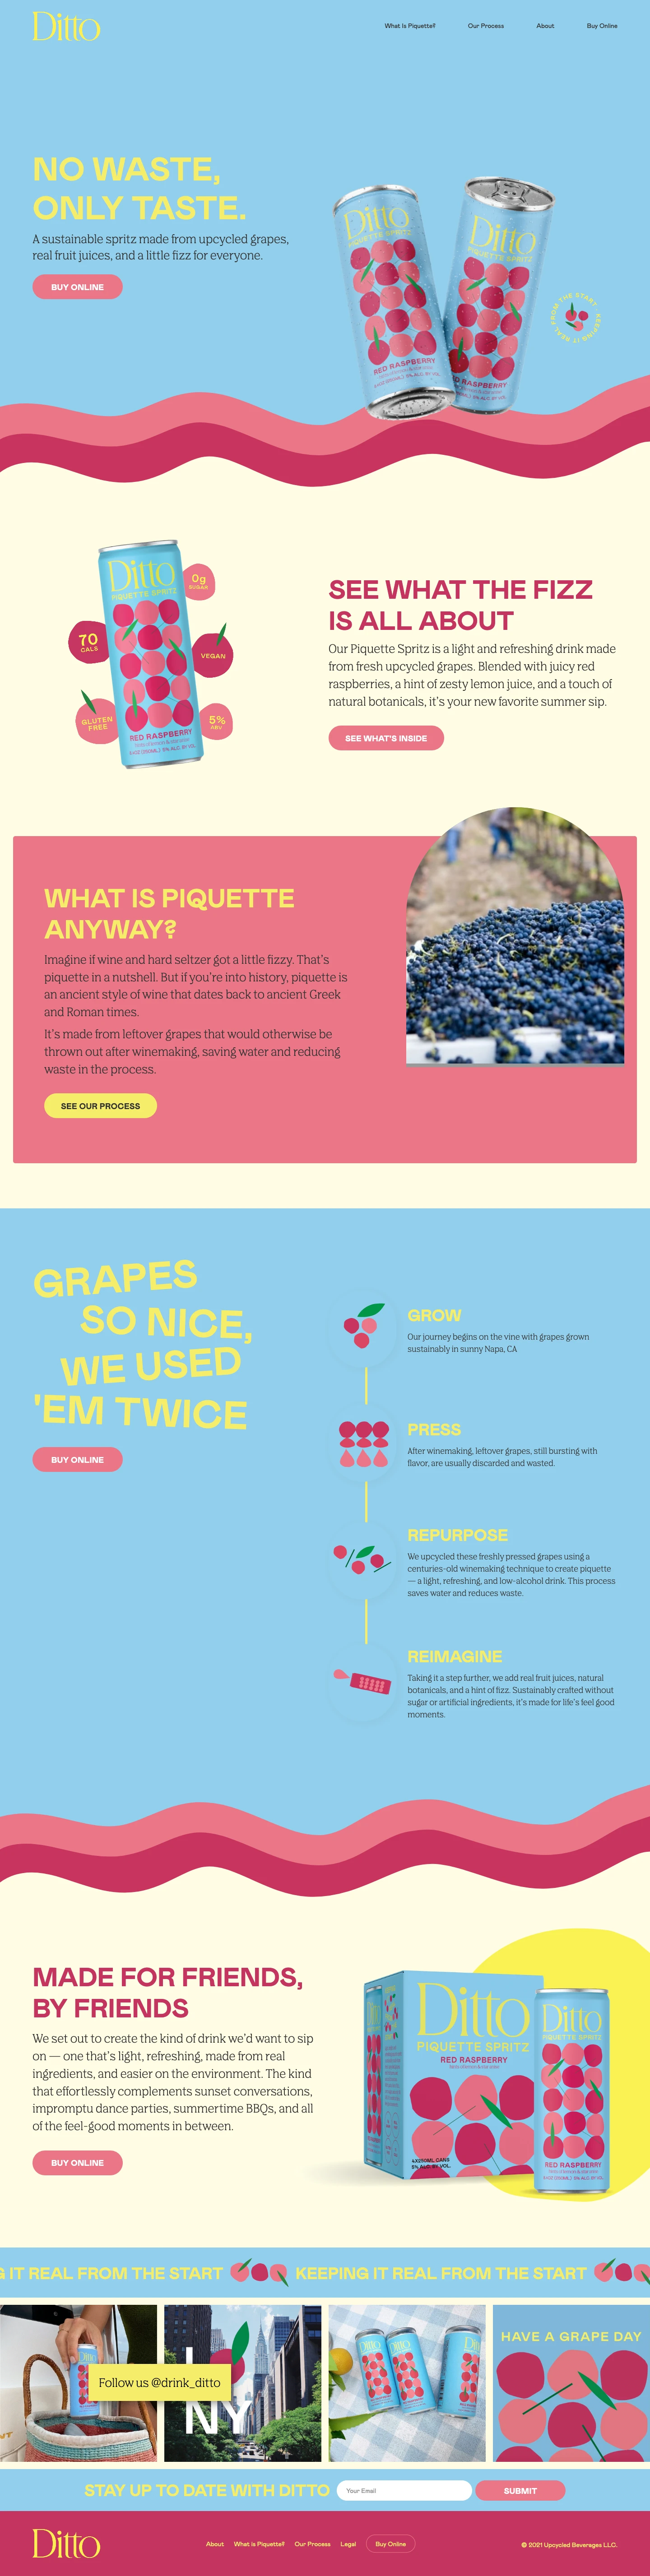 Drink Ditto Landing Page Example: A sustainable spritz made from upcycled grapes, real fruit juices, and a little fizz for everyone.